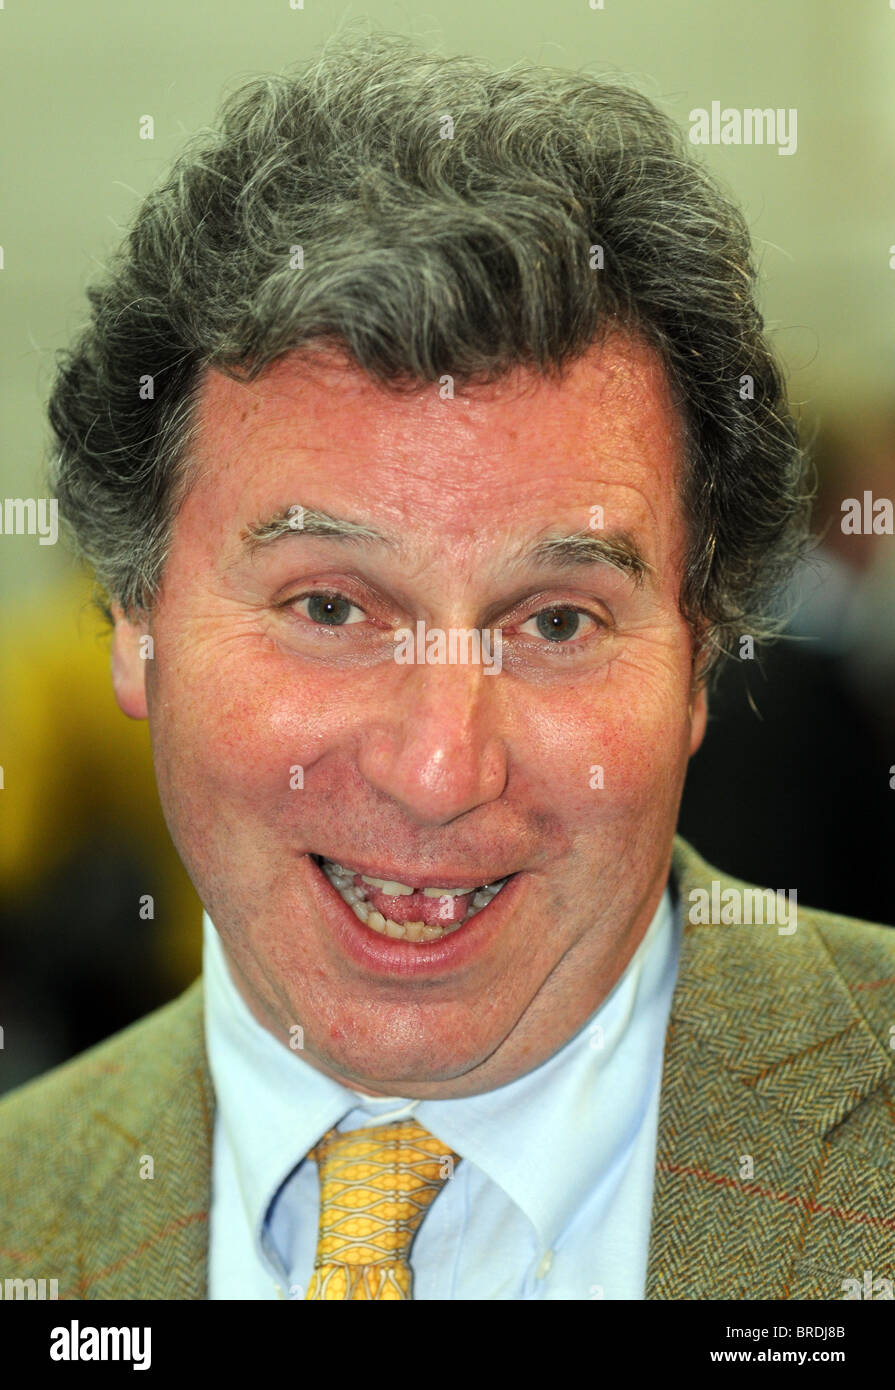 Oliver Letwin MP, konservative Tory-Politikers Oliver Letwin MP Stockfoto